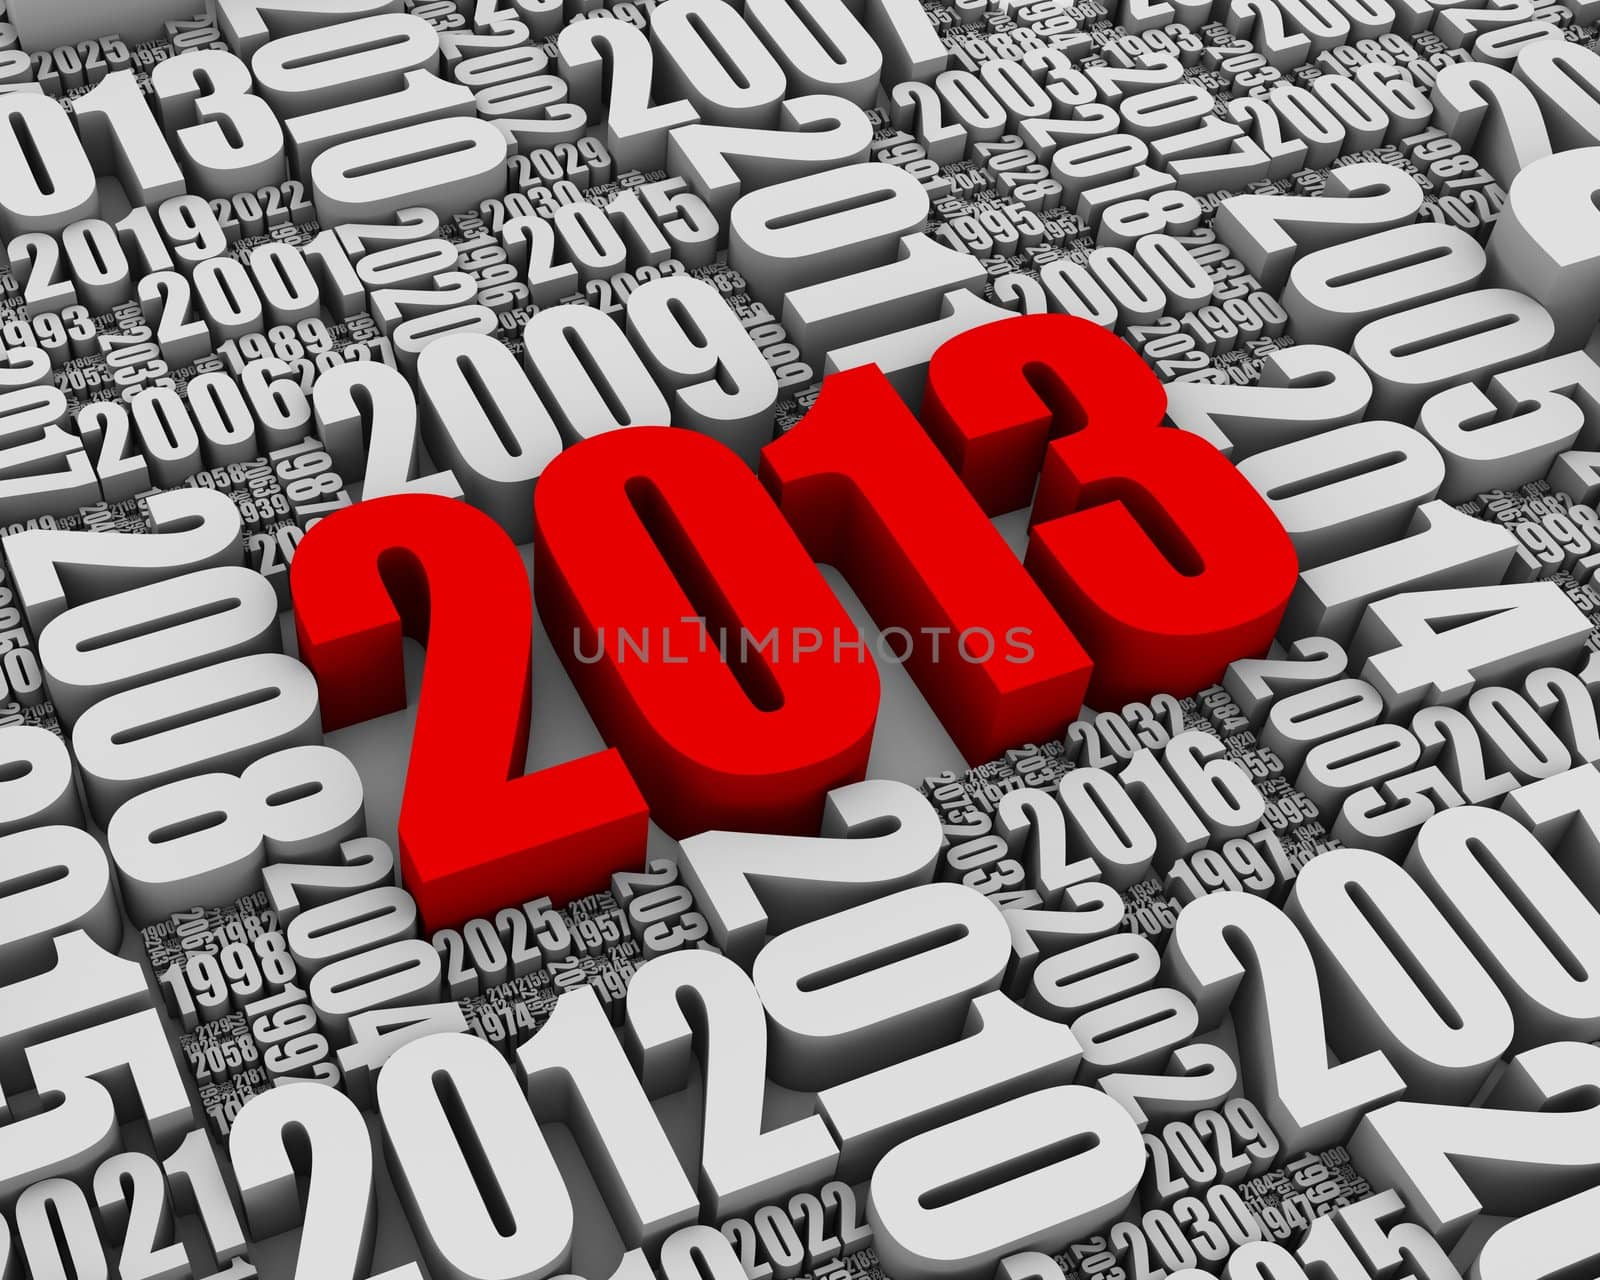 Year 2013 red 3D text surrounded by other dates. Part of a series.